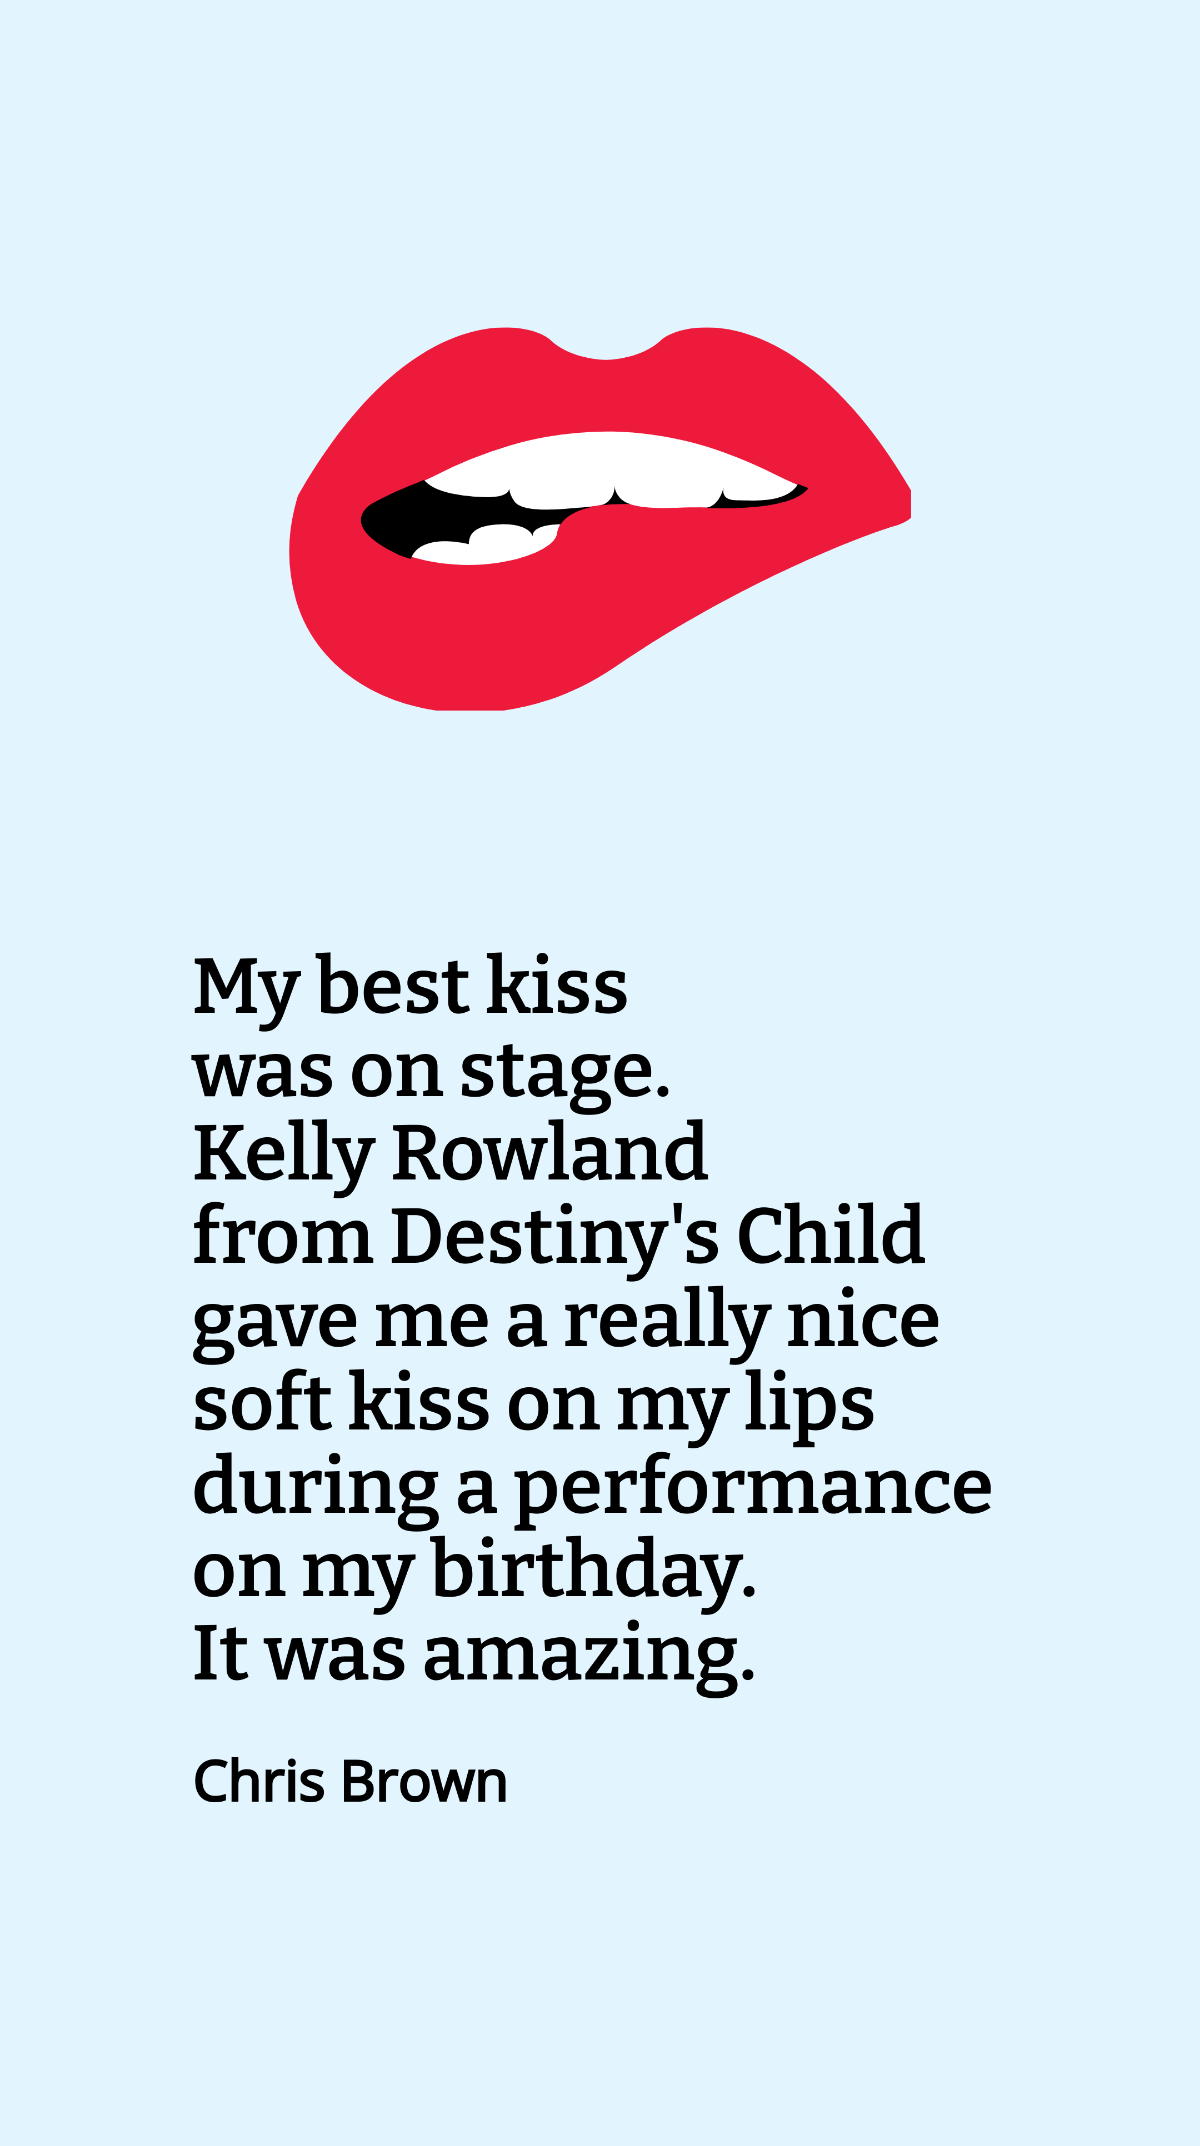 Chris Brown - My best kiss was on stage. Kelly Rowland from Destiny's Child gave me a really nice soft kiss on my lips during a performance on my birthday. It was amazing.